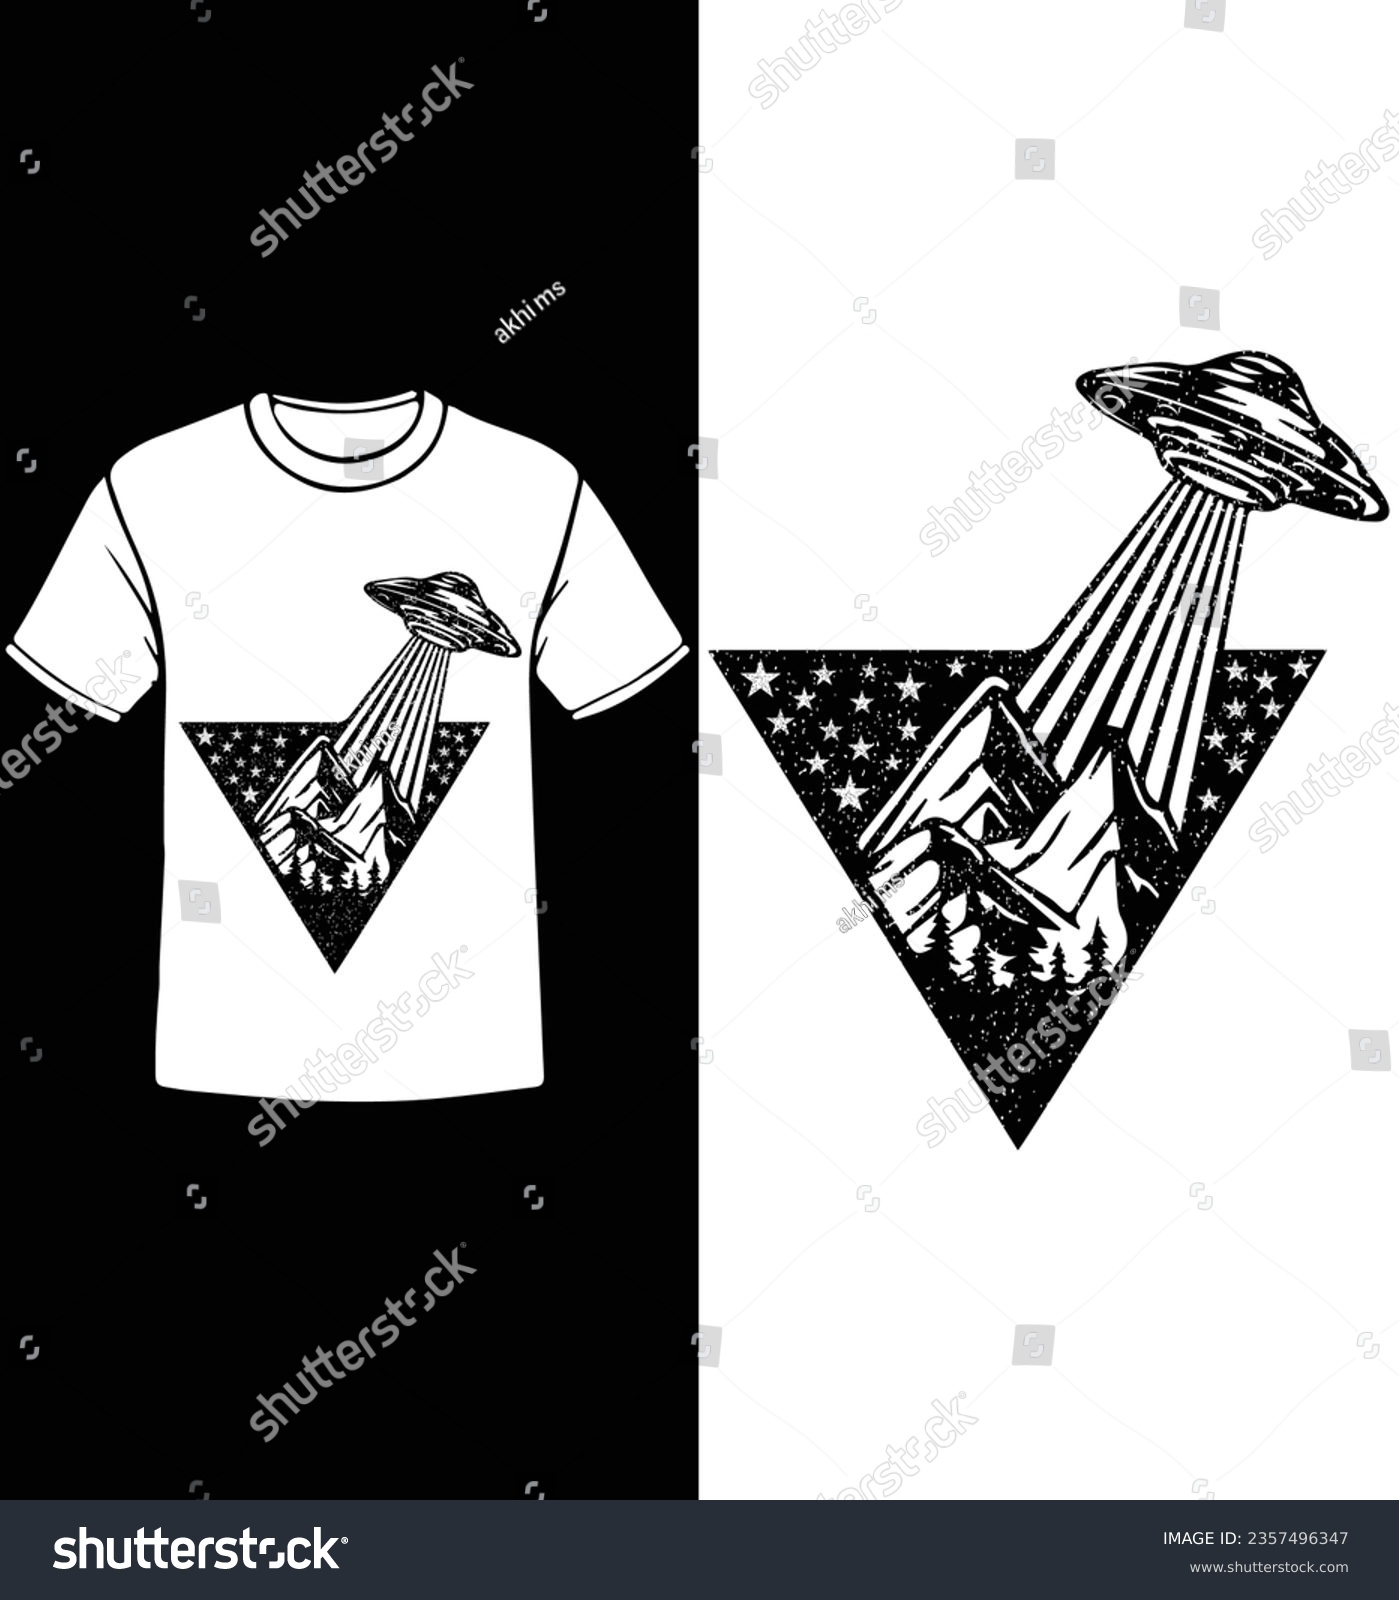 SVG of Alien Ufo in mountains svg for cricut, ufo alien t-shirt design, dxf laser cut, png clipart, wall decal svg, sublimation svg, vector forest svg